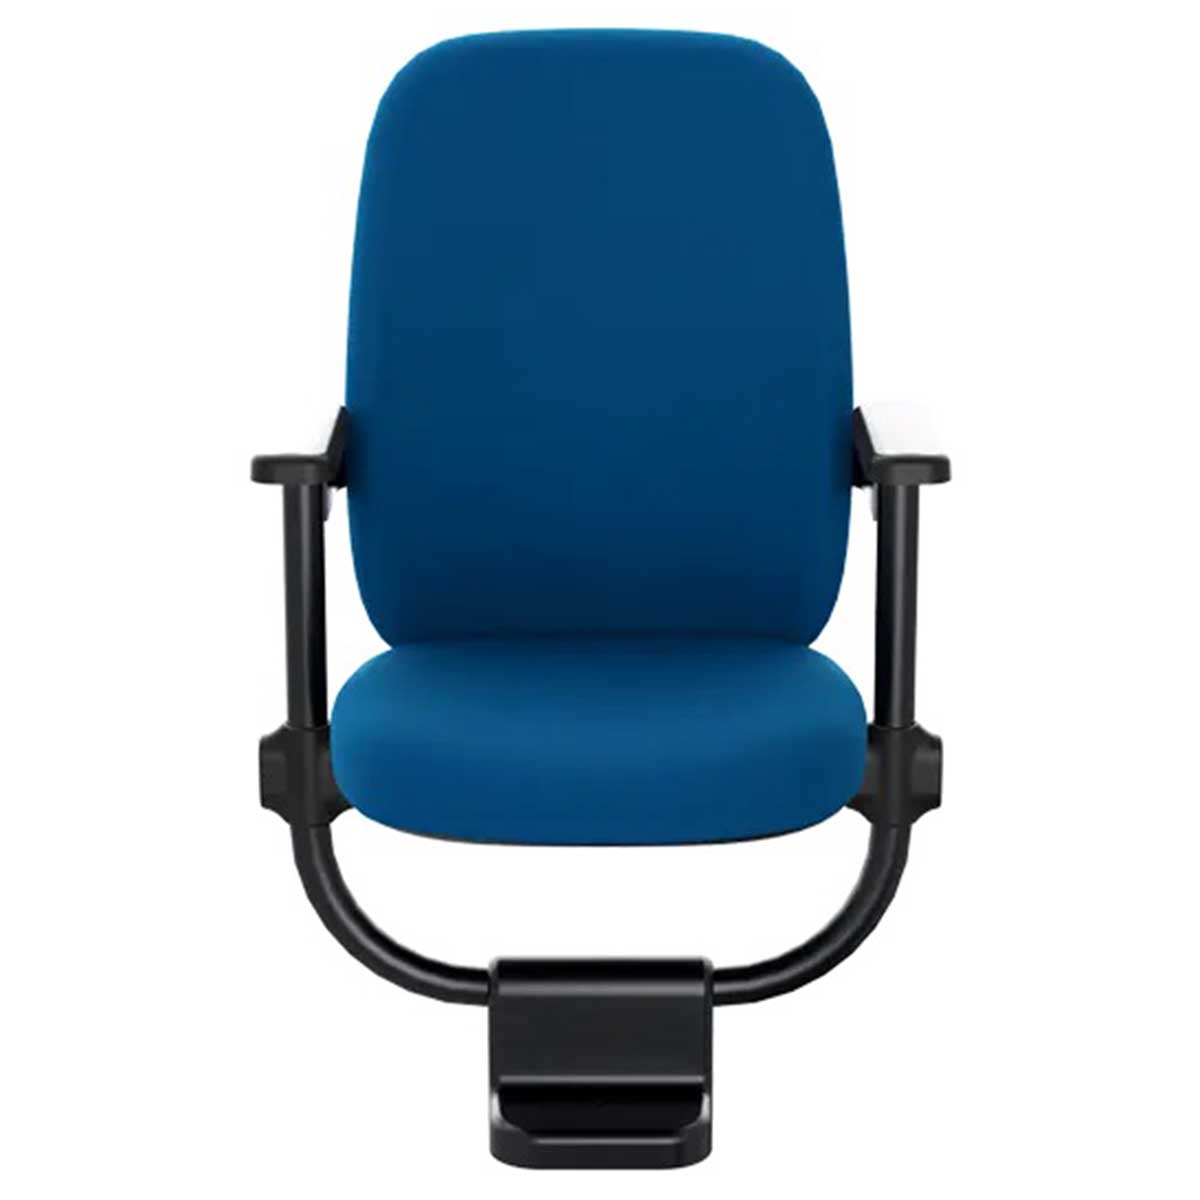 Push Back Chair Manufacturers, Suppliers in Manglapuri